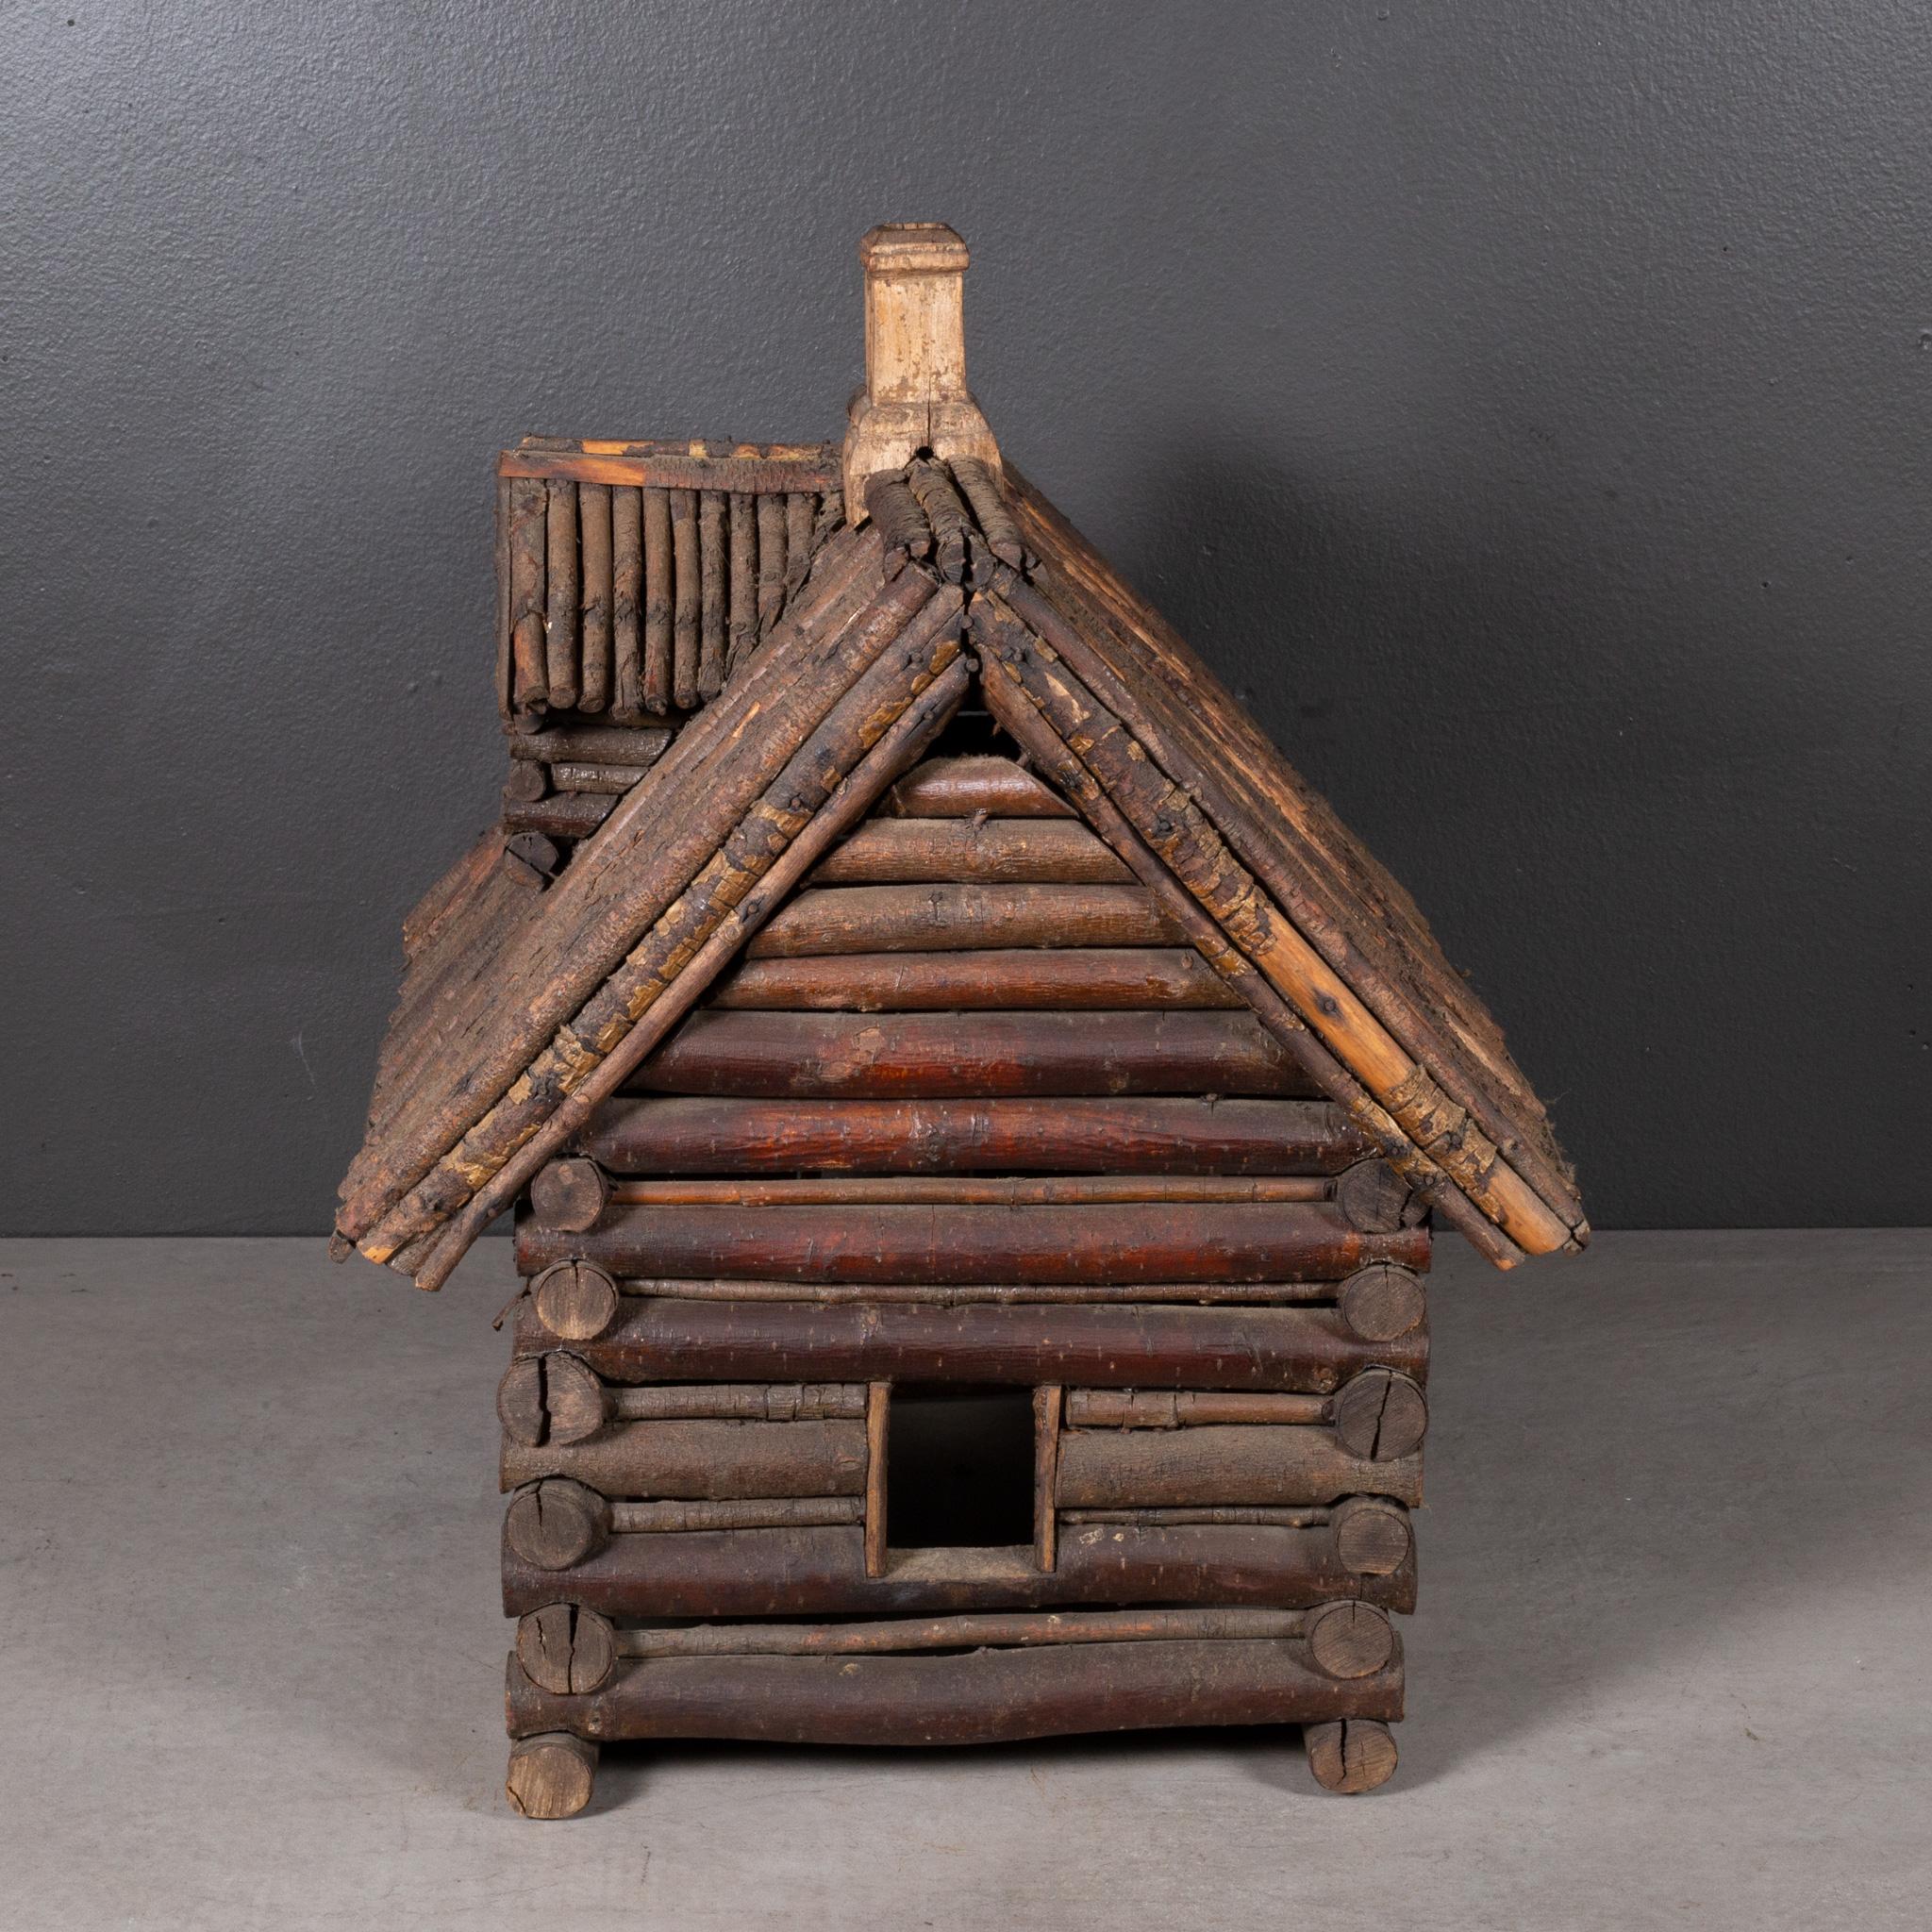 Anfang 20. Jh. Volkskunst Log Cabin Modell ca. 1900-1940 (FREE SHIPPING) im Zustand „Gut“ im Angebot in San Francisco, CA